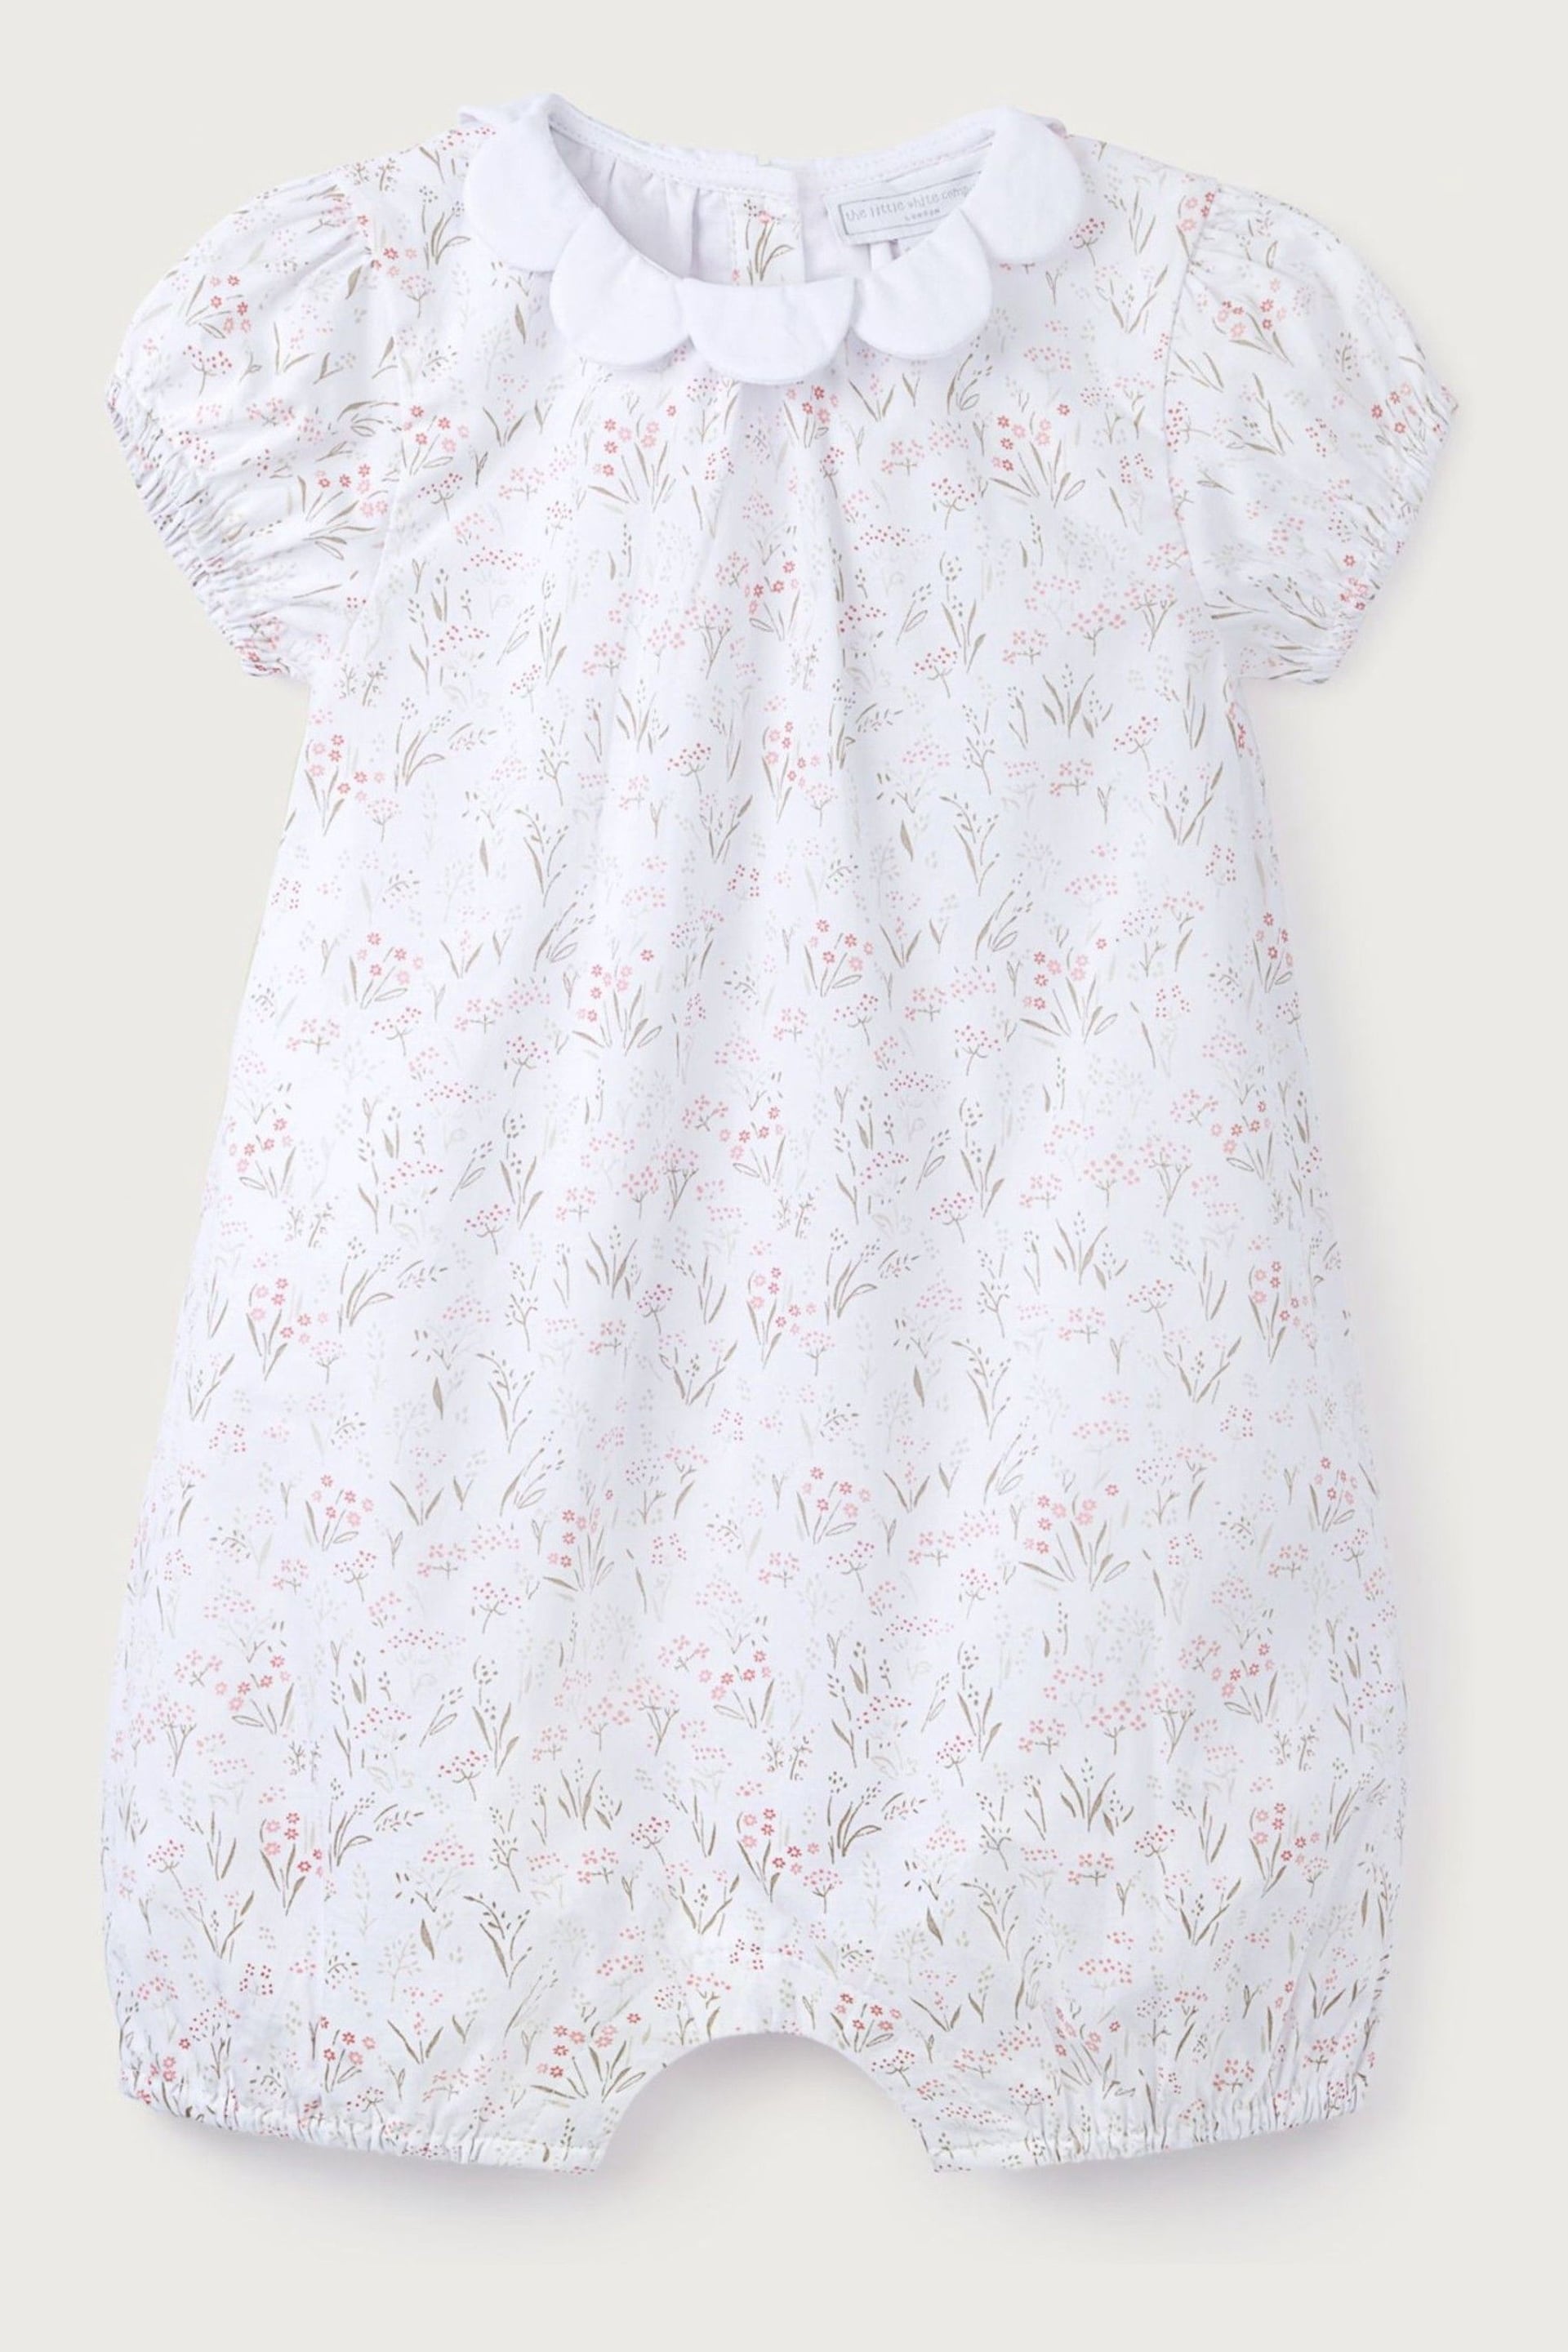 The White Company Celine Floral Cotton Petal Collar White Sleepsuit - Image 4 of 6